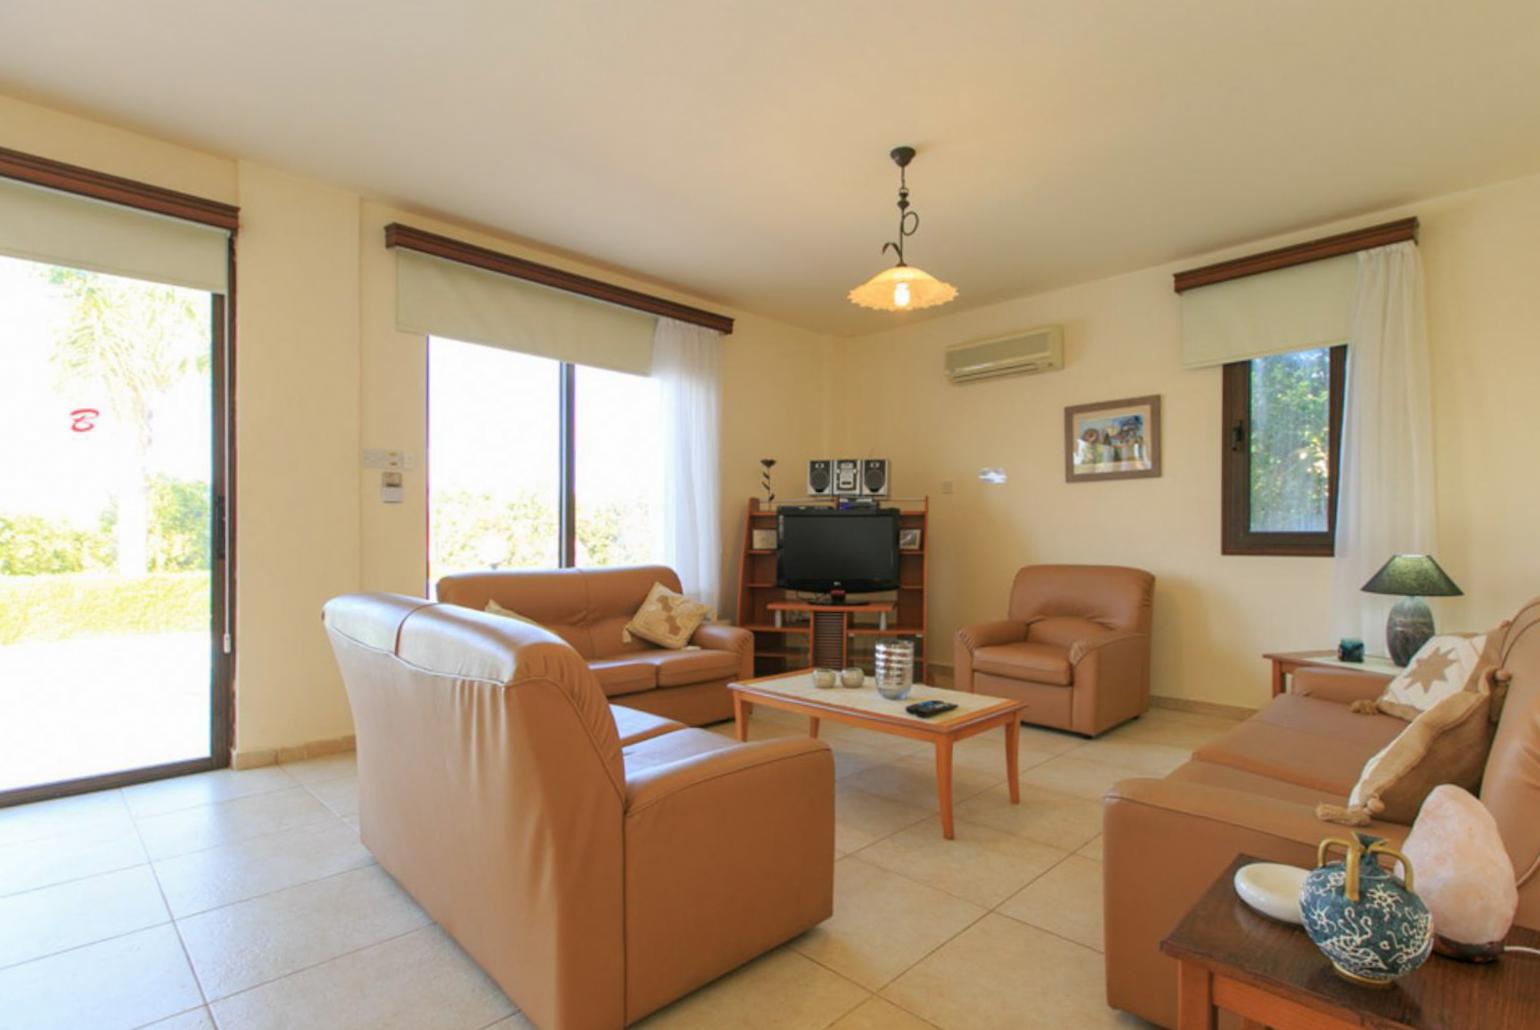 Open-plan living room with sofas, dining area, kitchen, A/C, WiFi internet, satellite TV, DVD player, and terrace access